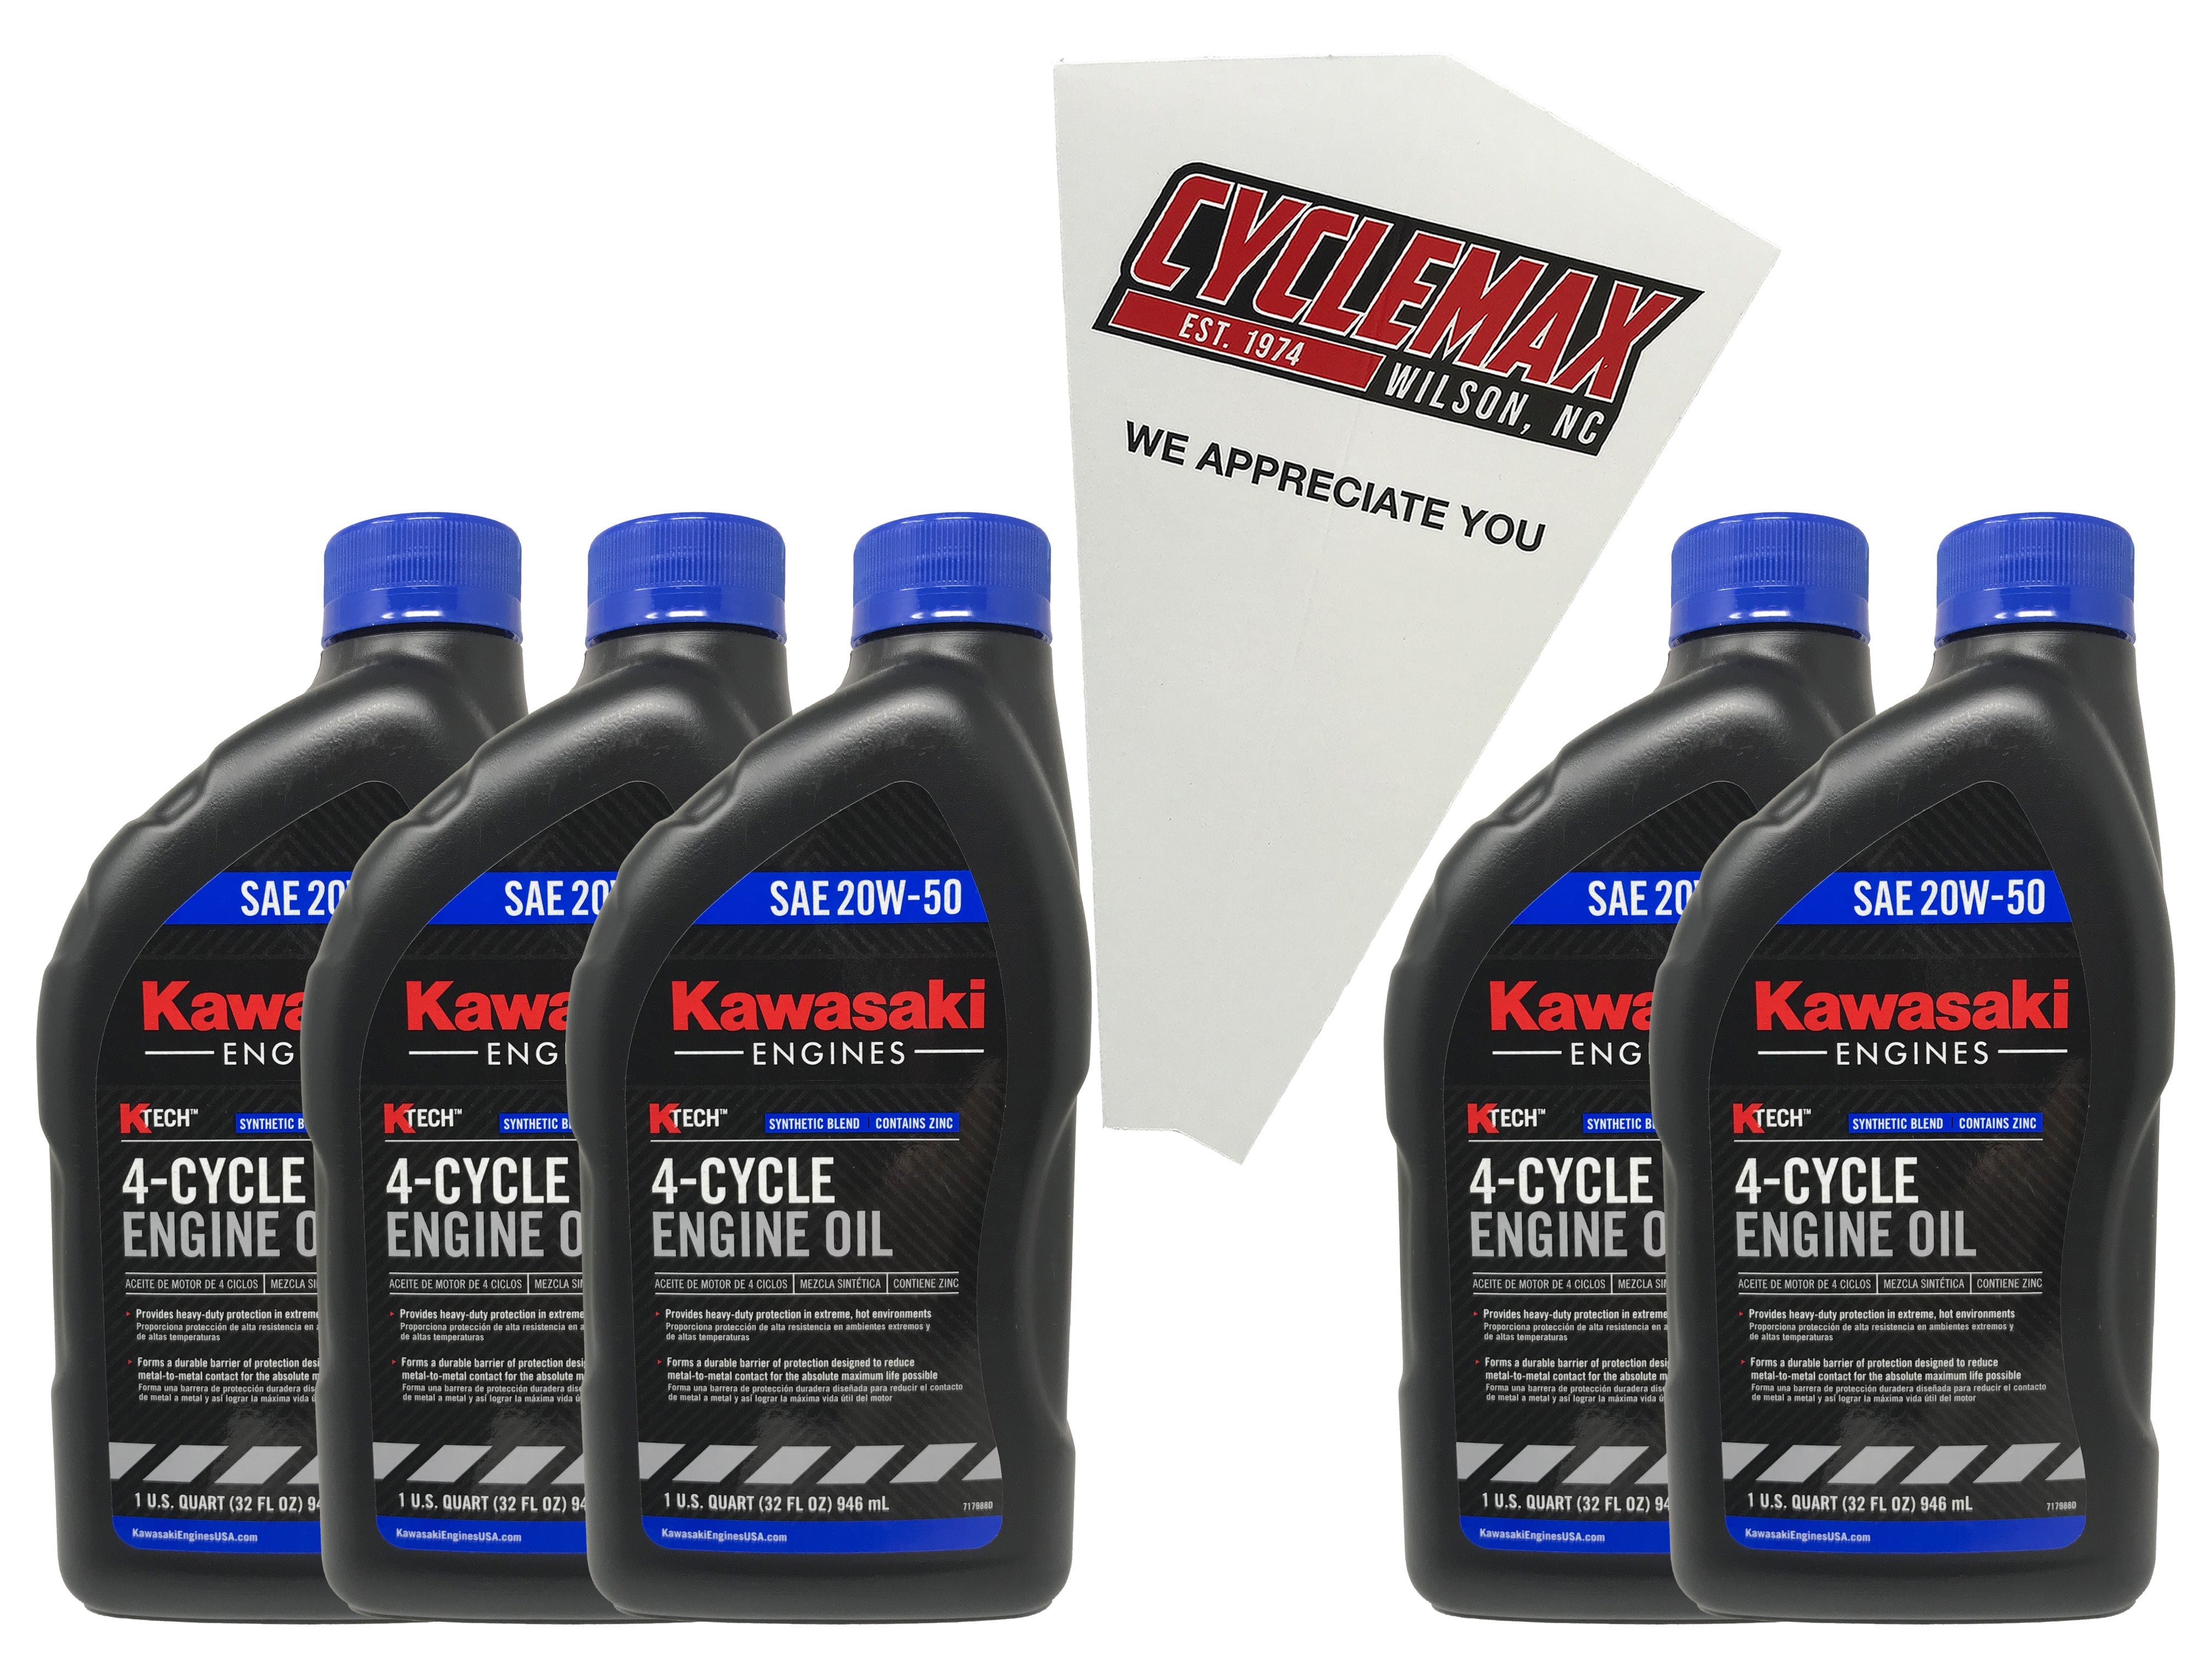 Cyclemax Five Pack for Kawasaki SAE 20W50 4-Cycle K-Tech Lawnmower Engine Oil 99969-6298 Contains Five Quarts and a Funnel